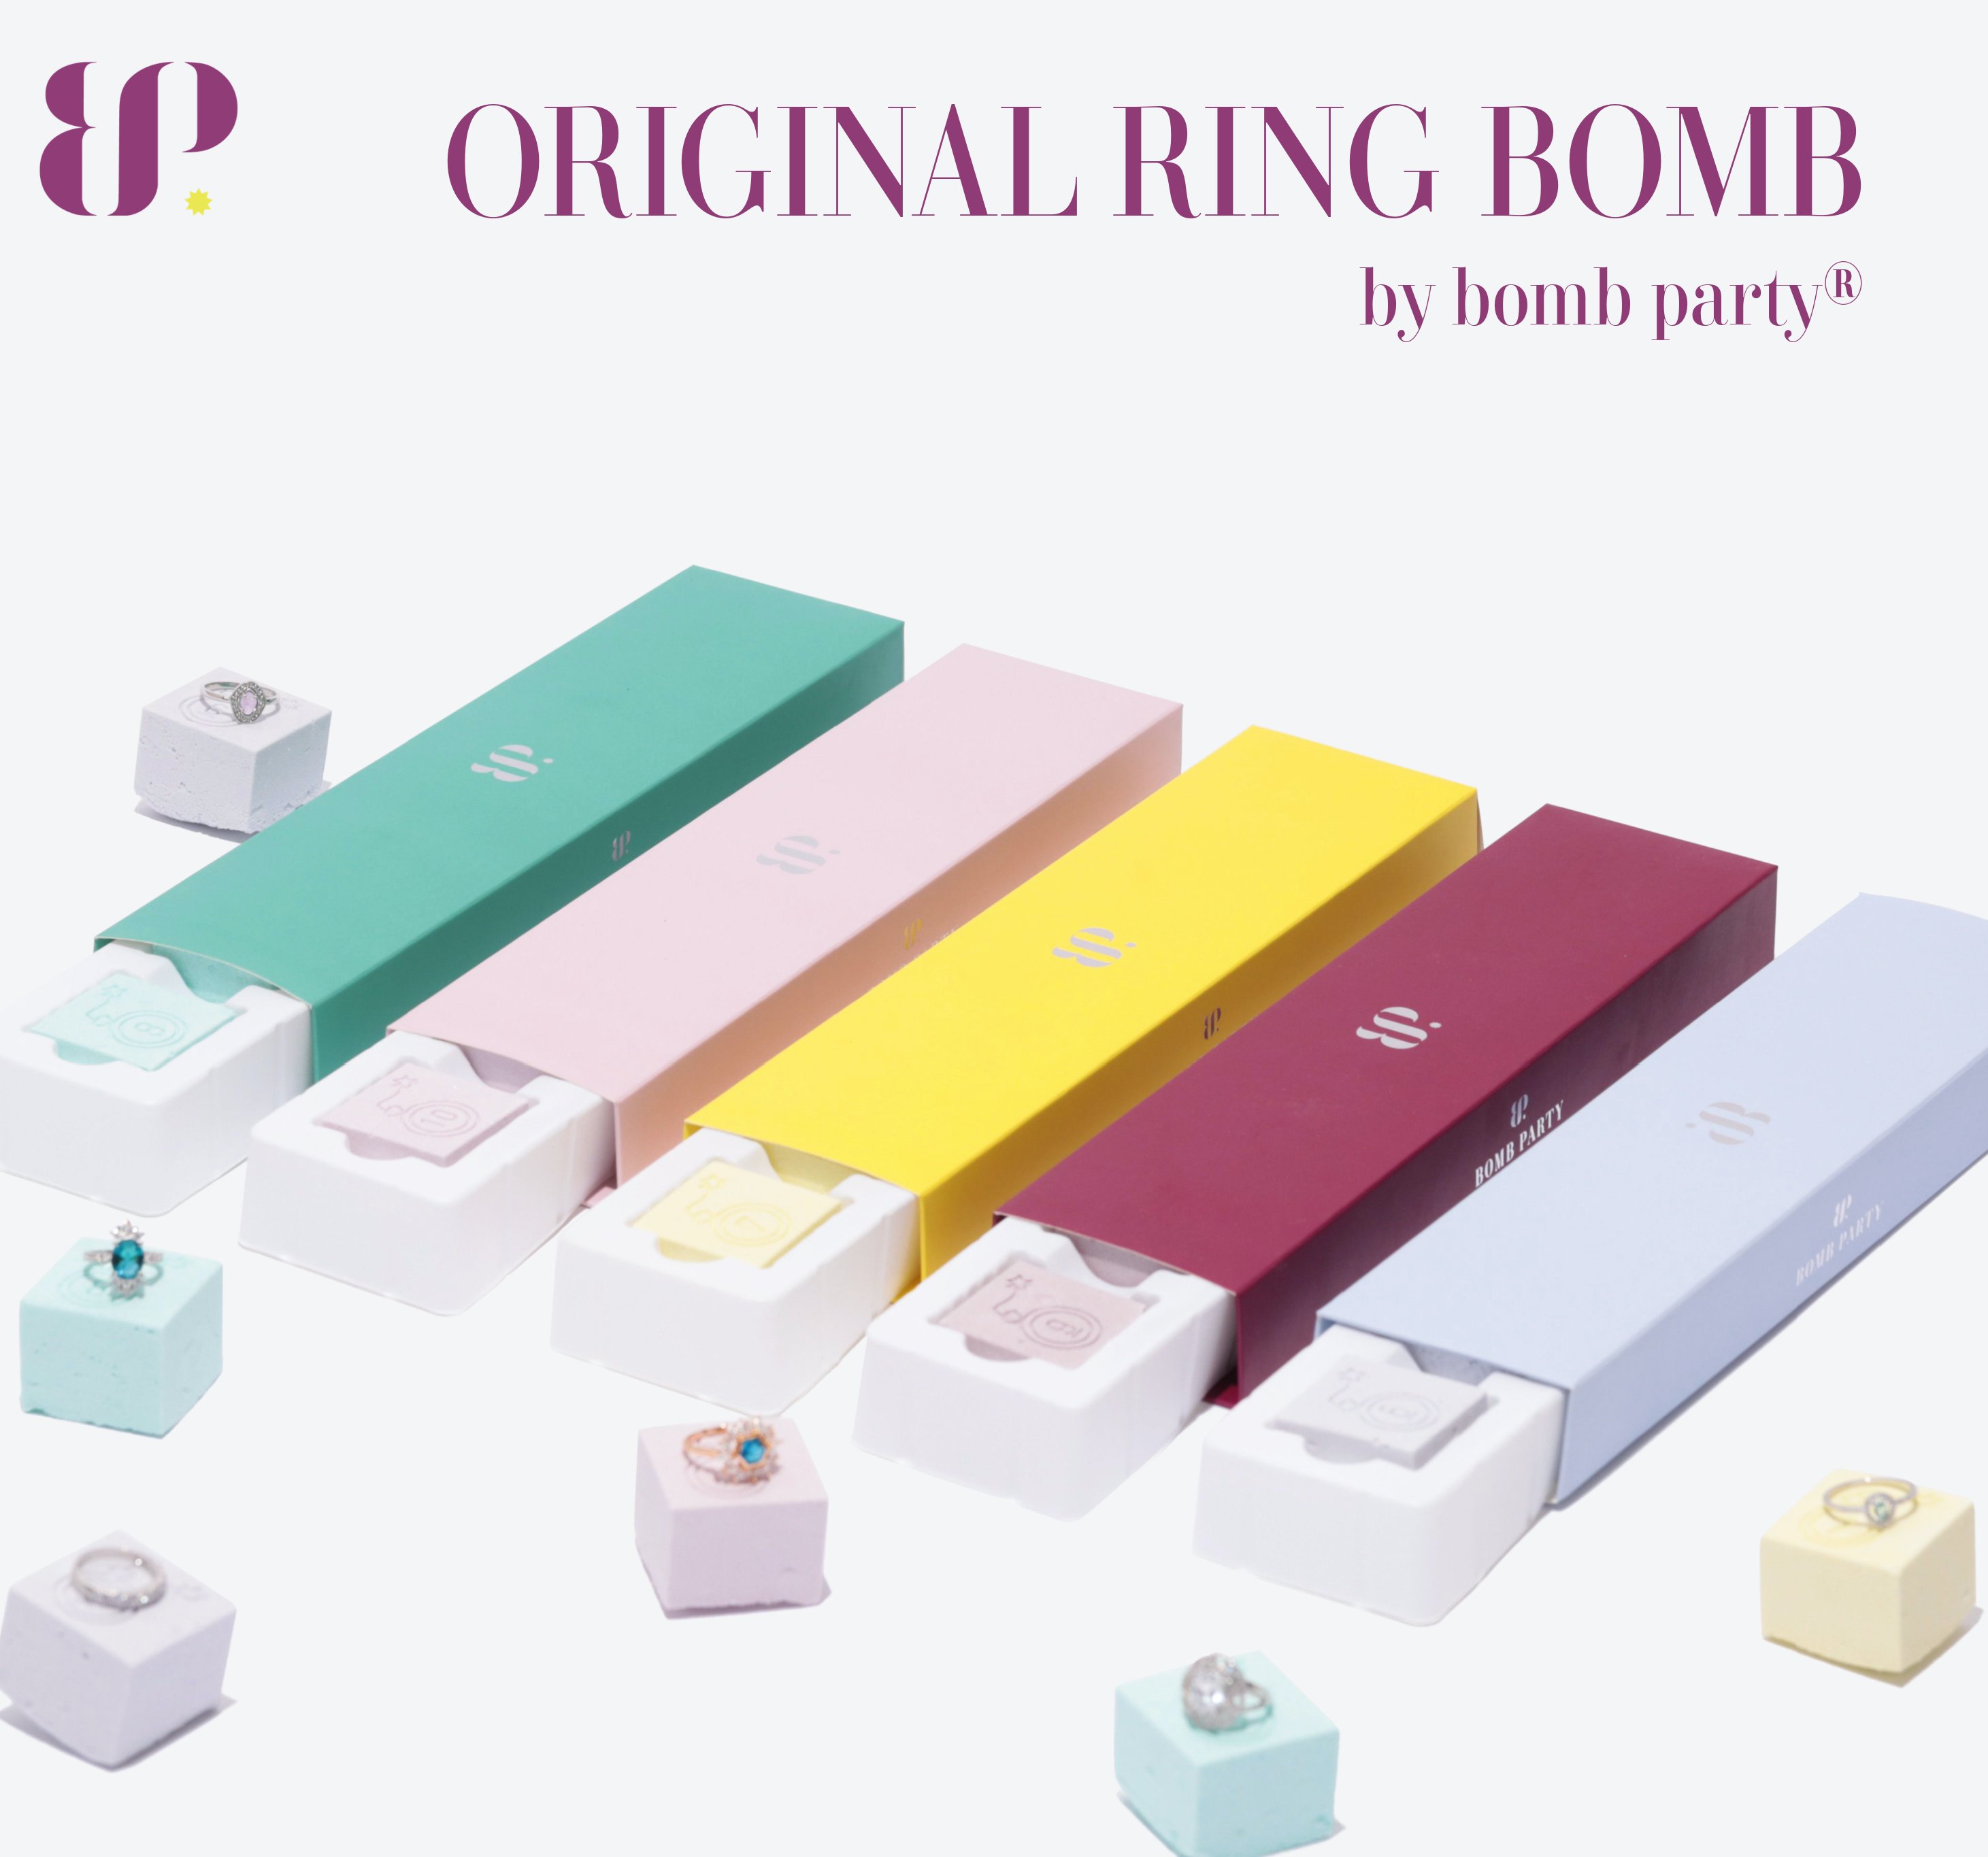 Our Original Ring Bombs are available in ring sizes 6-10 at $19.95 each.